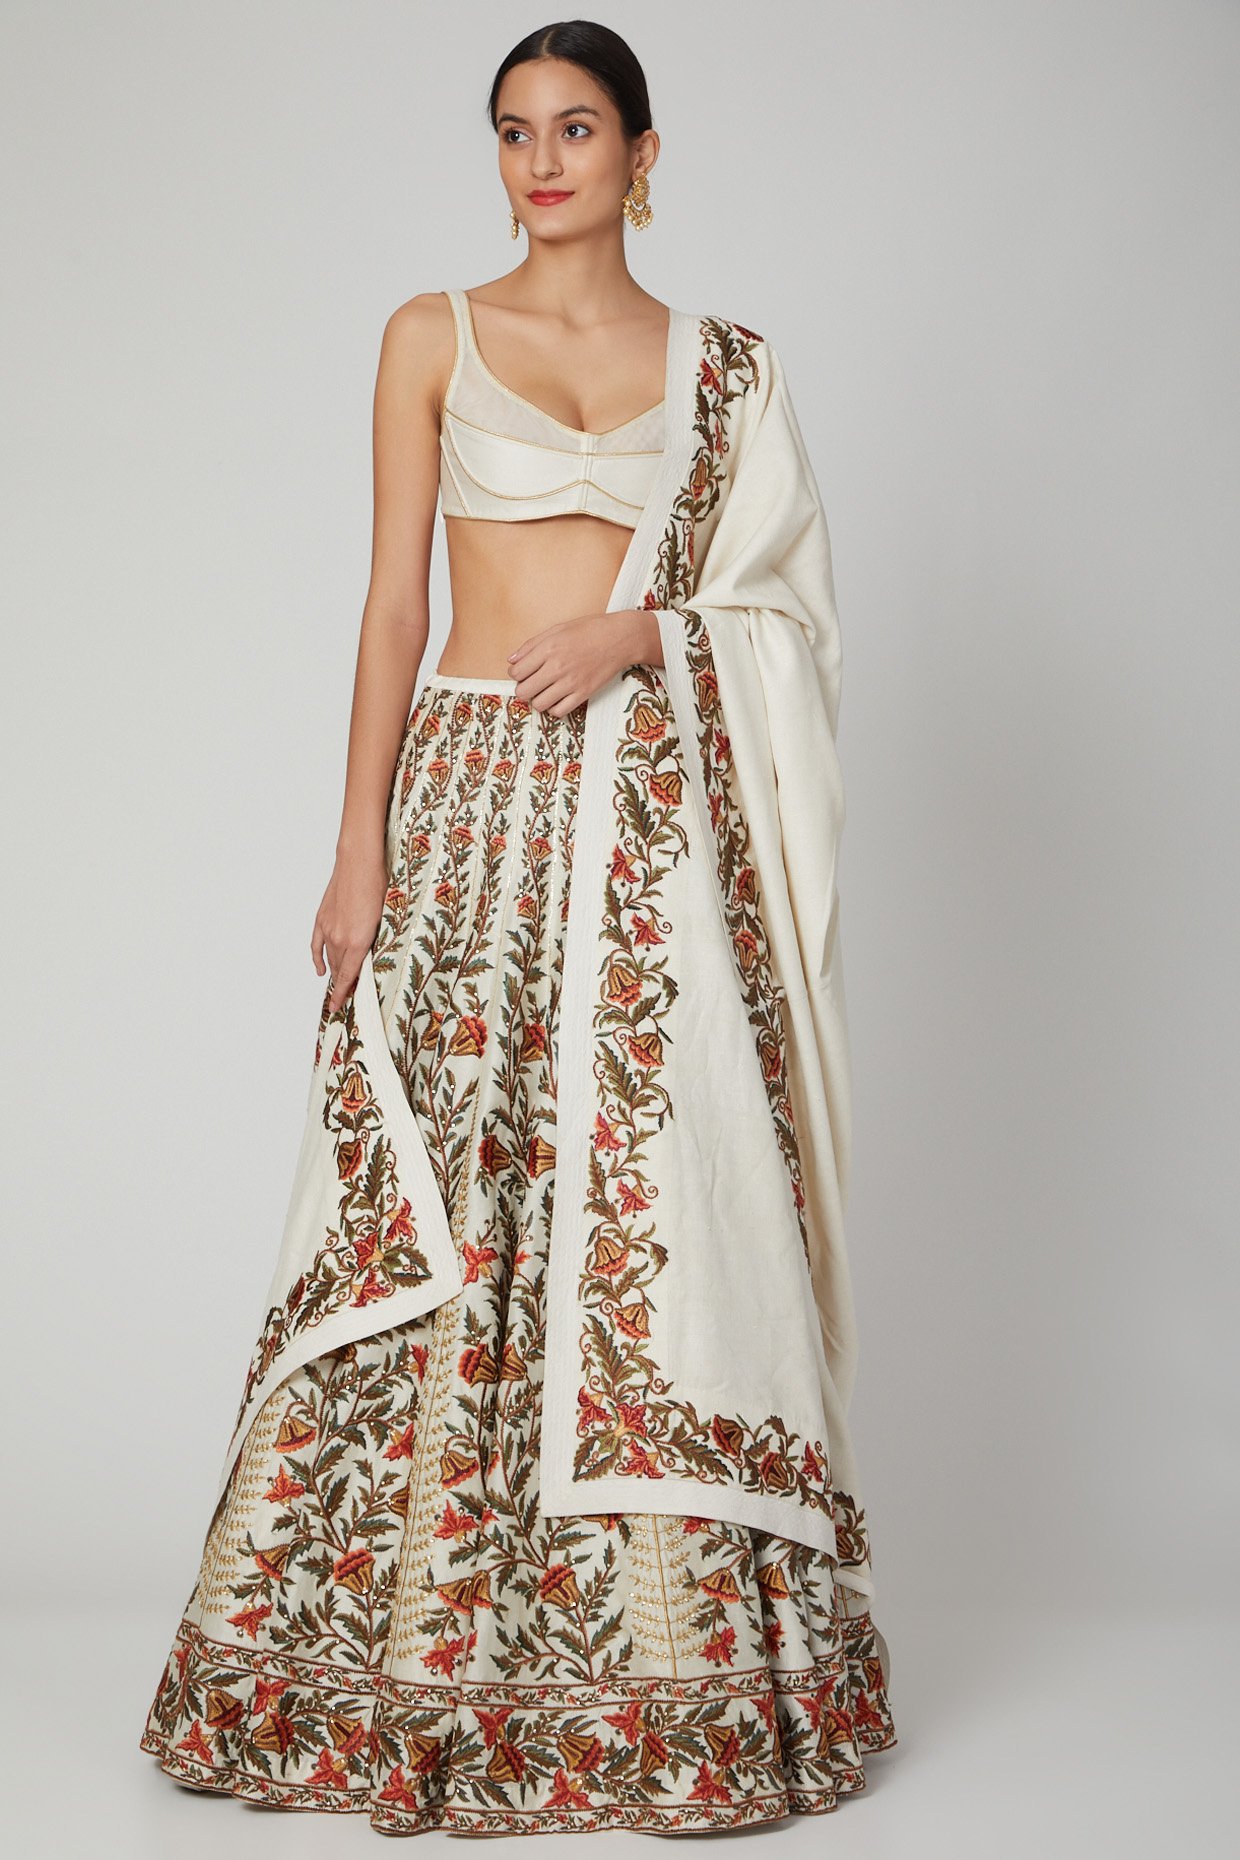 Rohit Bal Velvet Embroidered Corset And Lehenga Set (L, Beige, Wine) in  Surat at best price by Lanchan Designer - Justdial